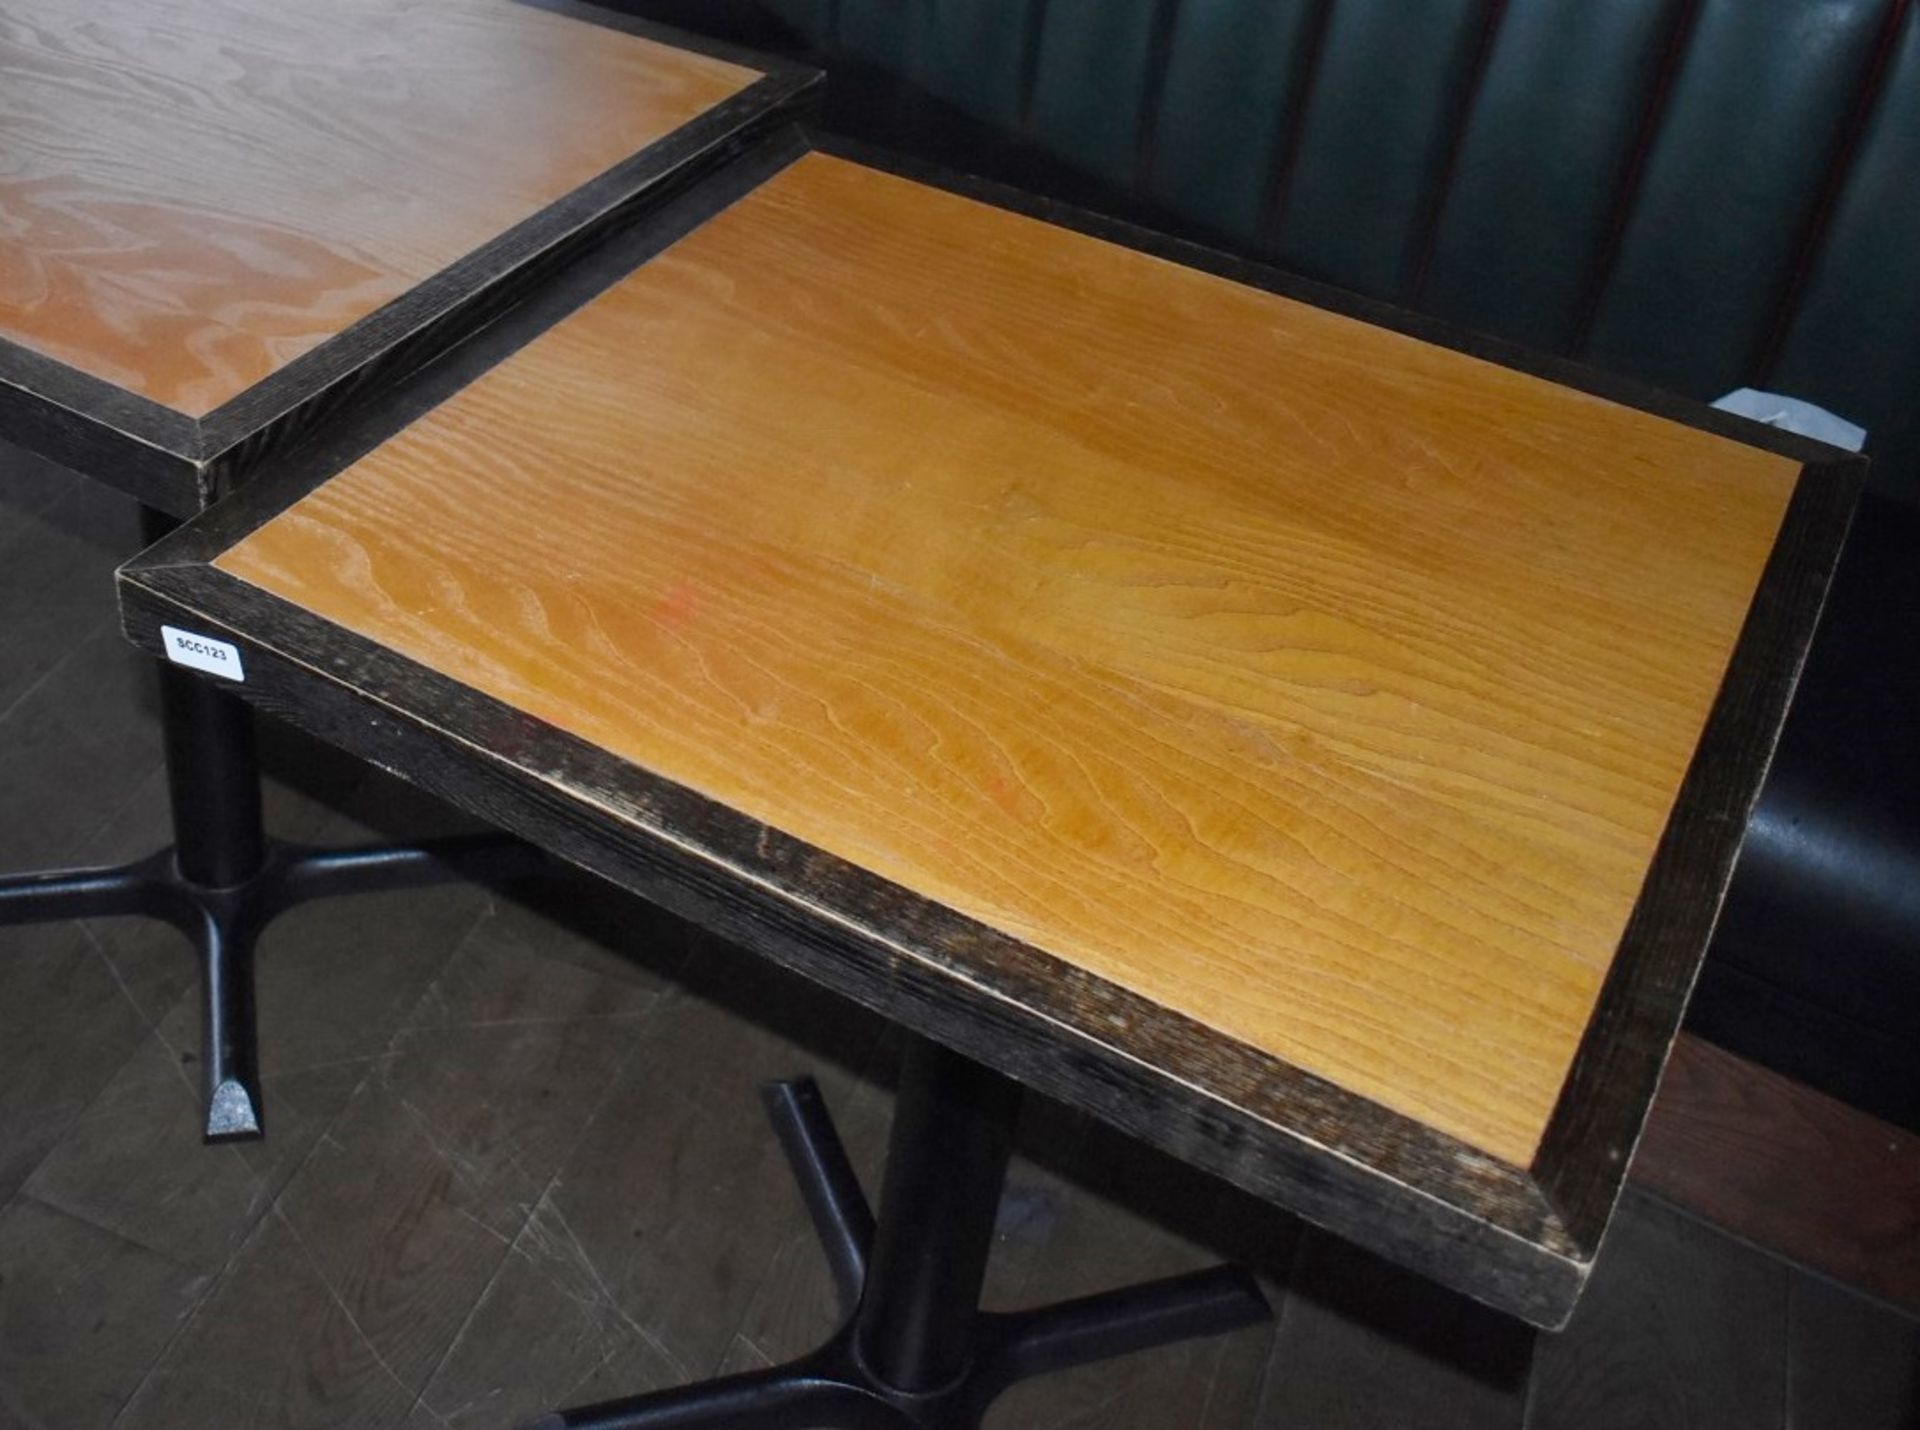 2 x Restaurant Dining Tables - Seats 2 Persons Per Table - Two Tone Wooden Top and Cast Iron Bases - Image 3 of 5